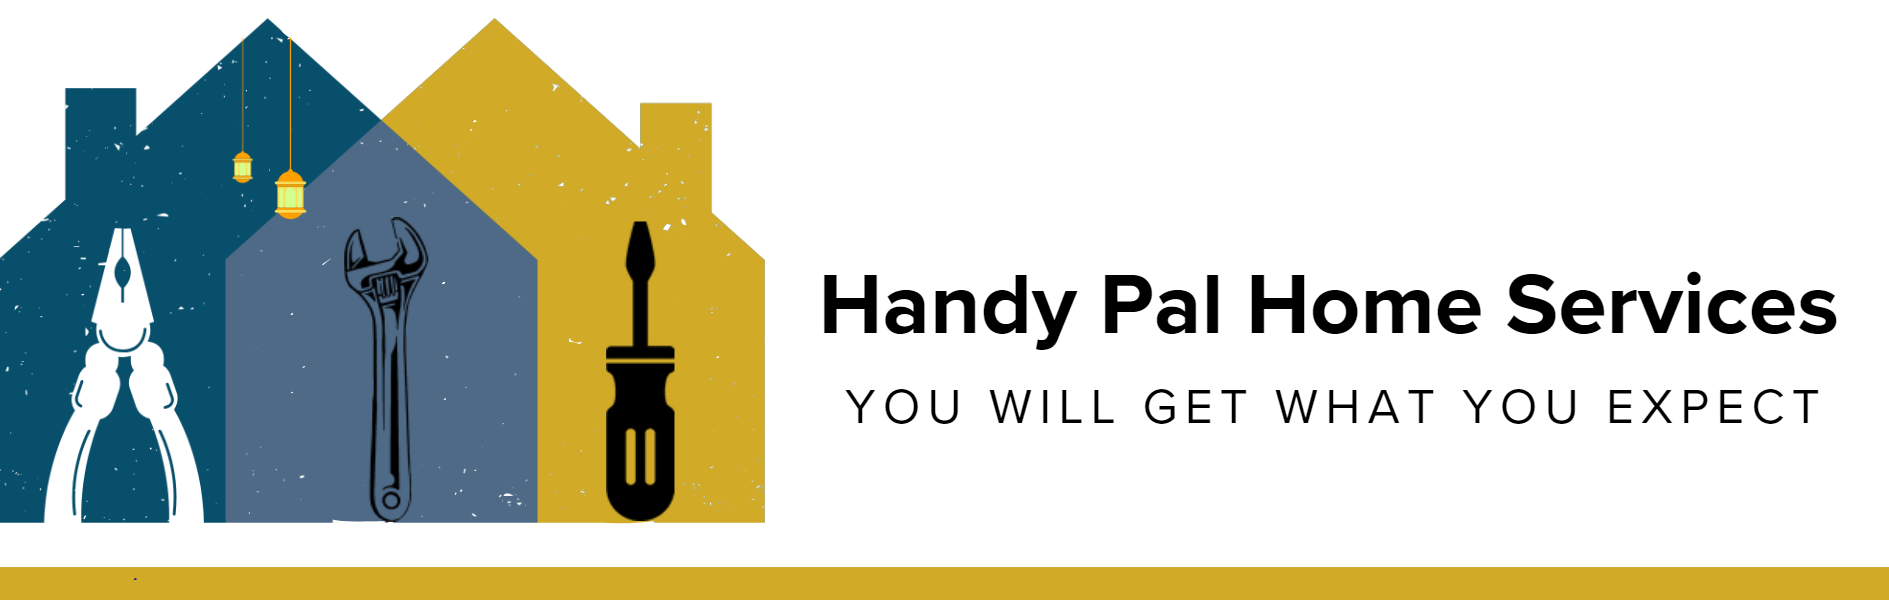 Handy Pal Home Services